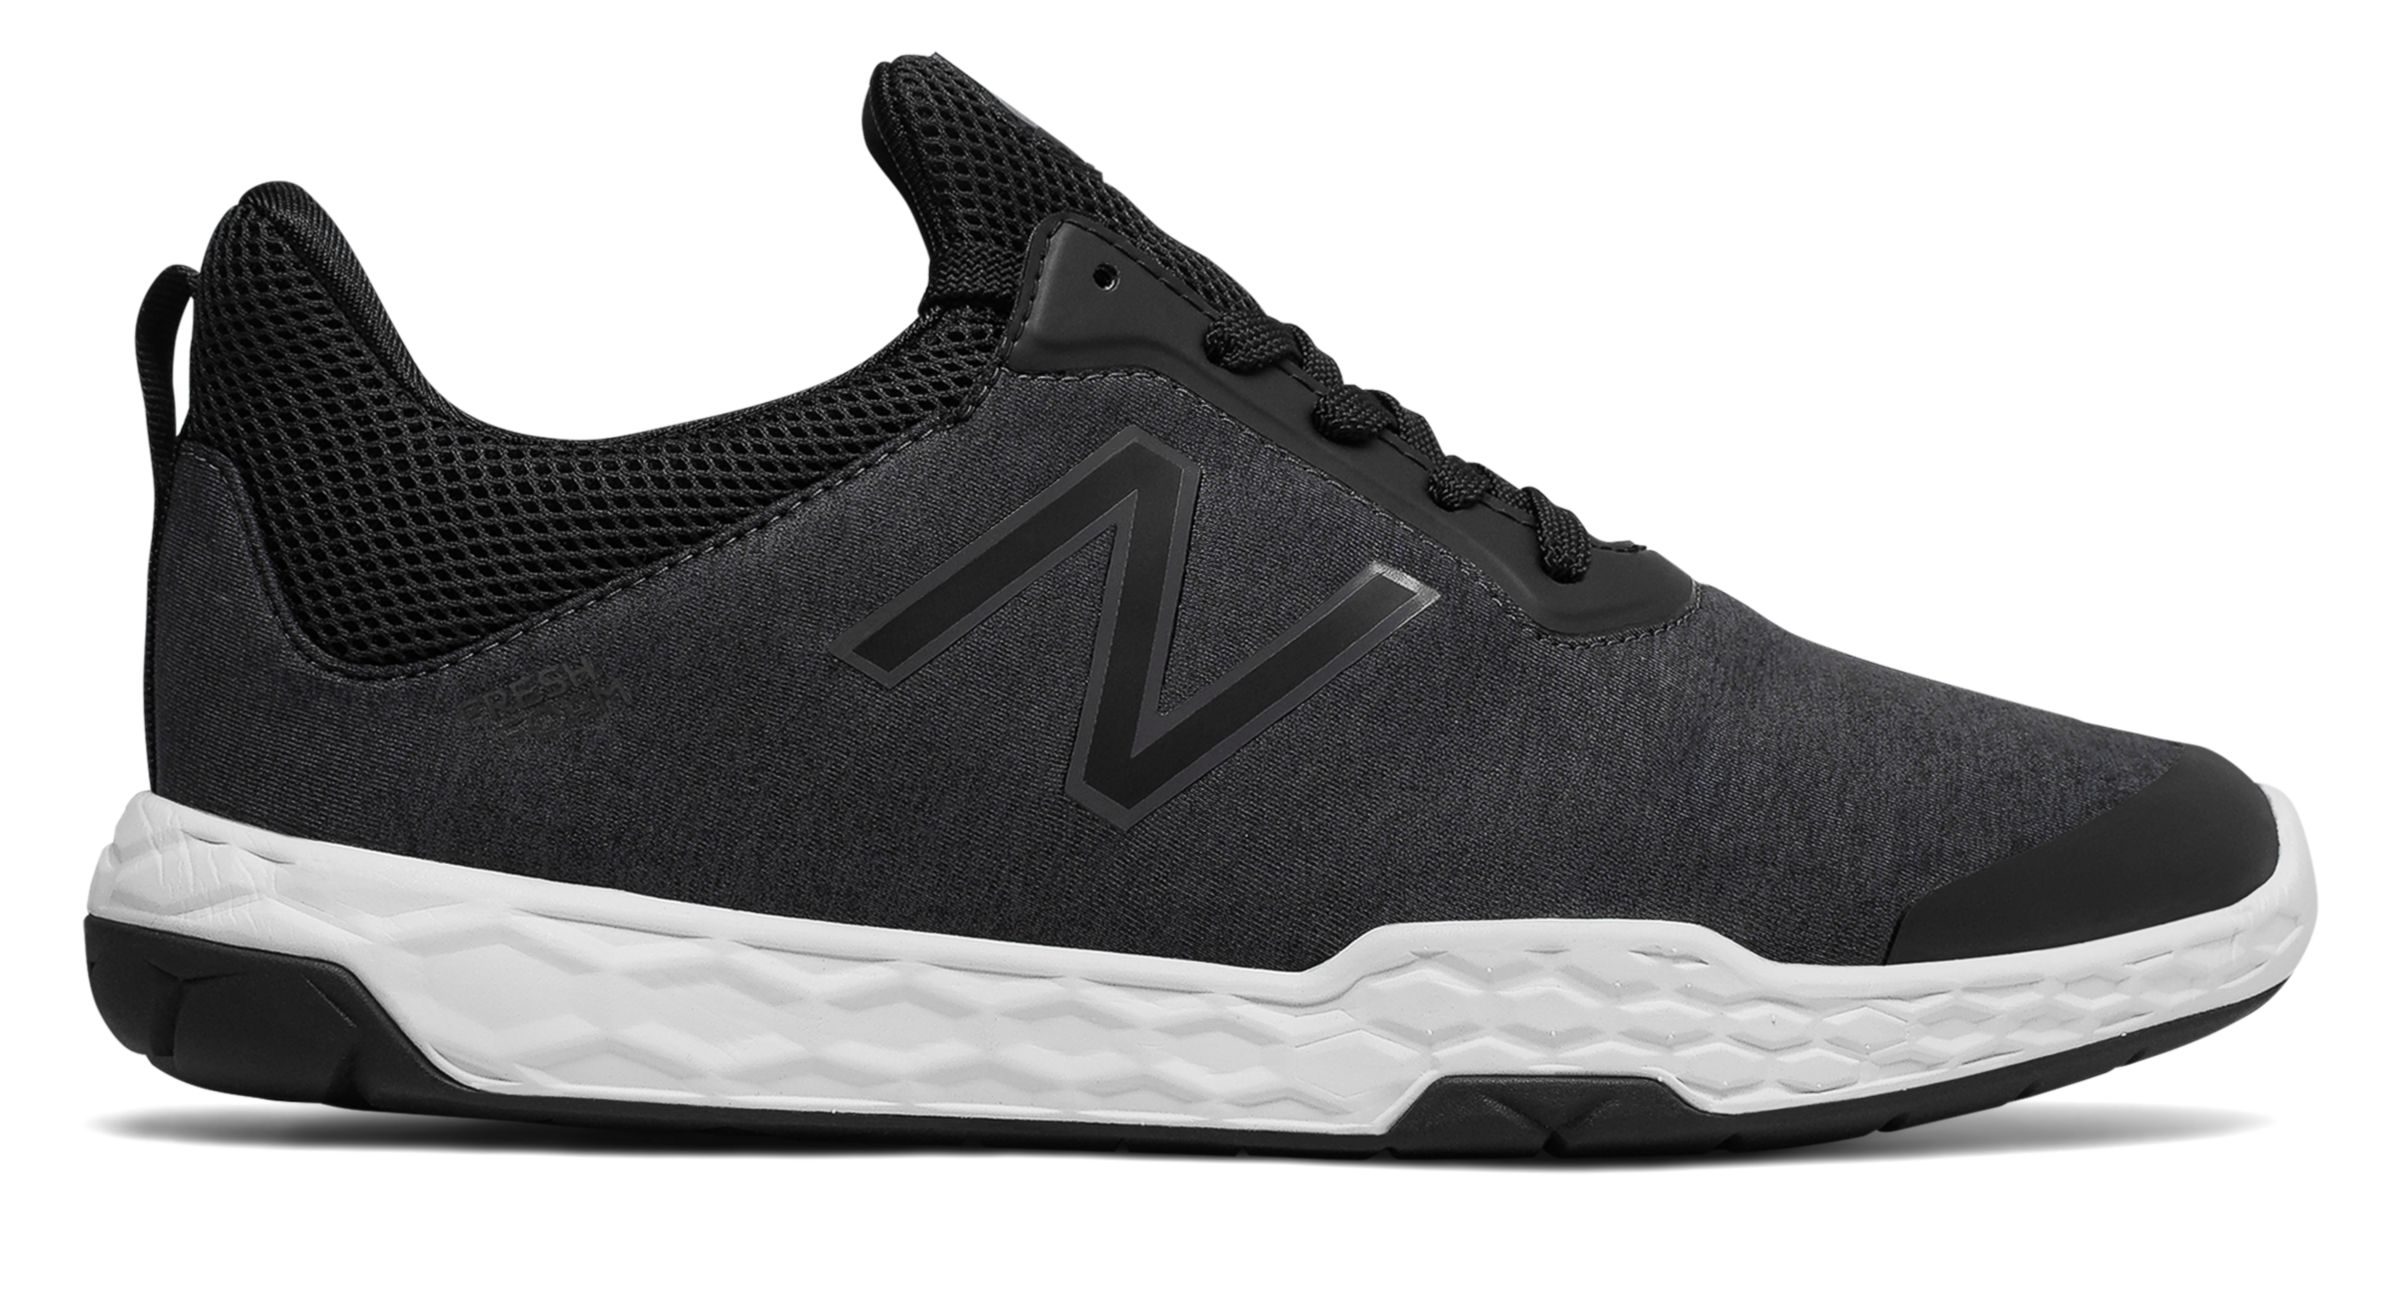 New Balance MX818-V3 on Sale - Discounts Up to 40% Off on MX818BK3 at Joe's New  Balance Outlet